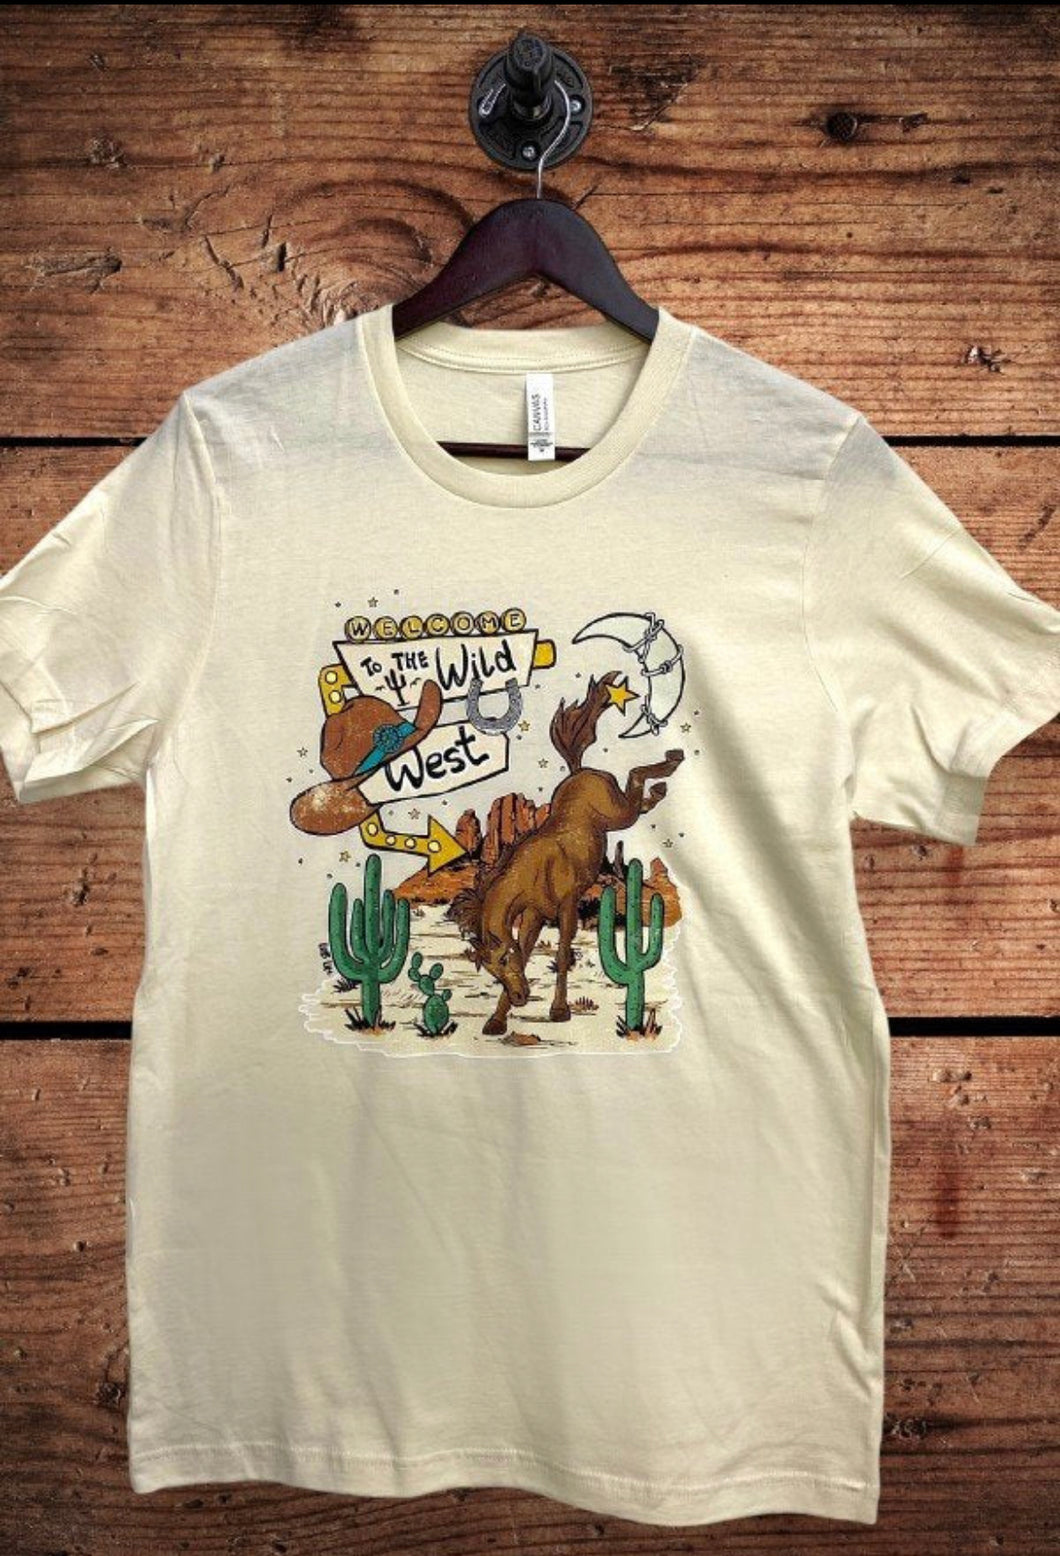 Welcome to the Wild West tee